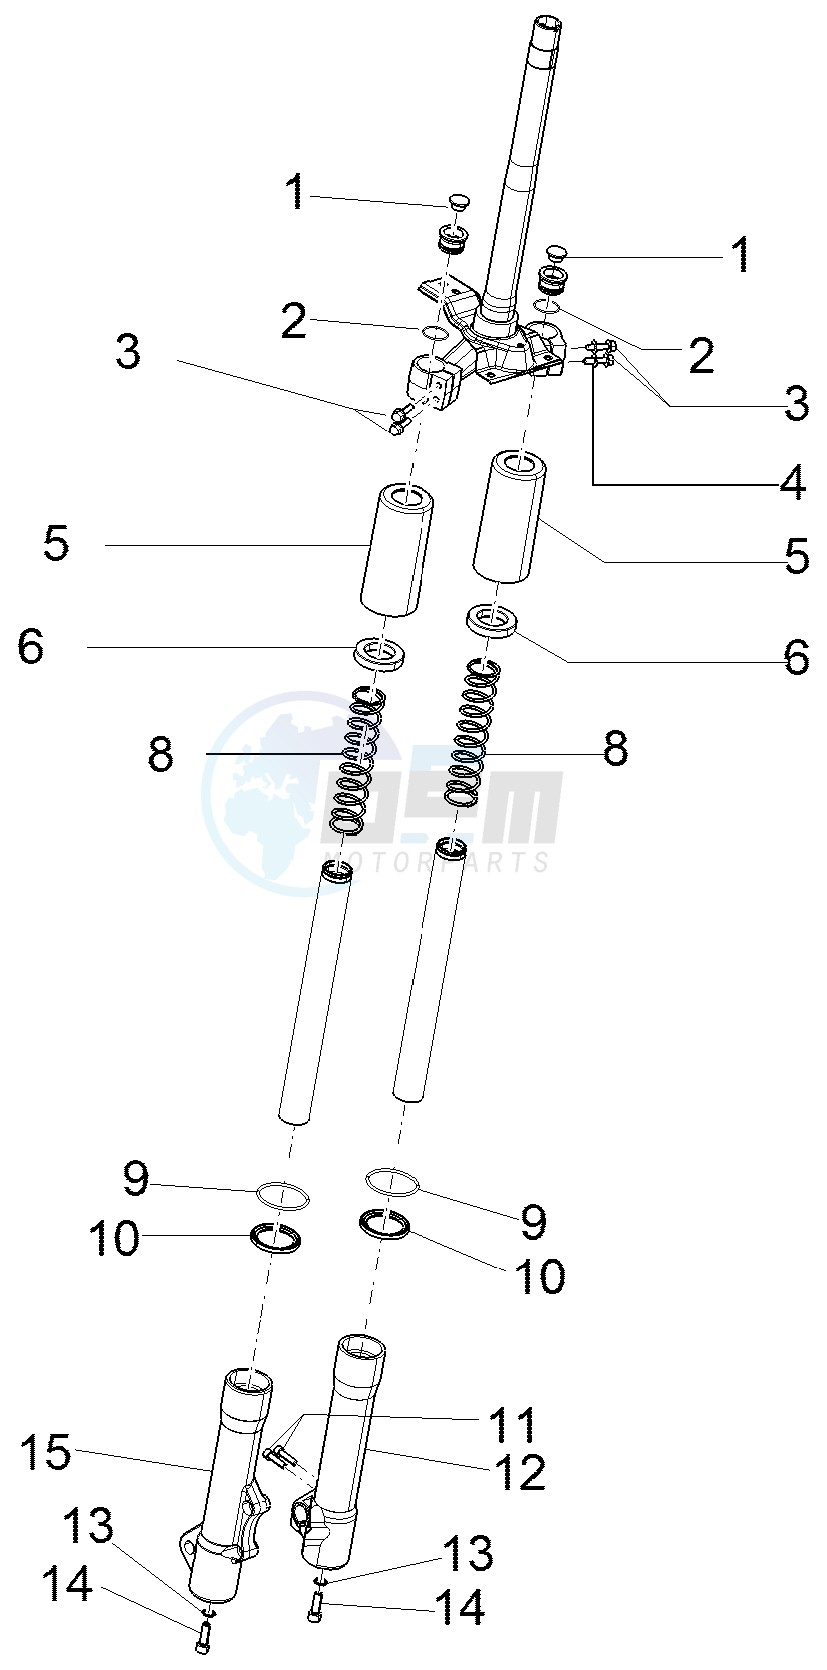 Fork's components (Wuxi Top) blueprint